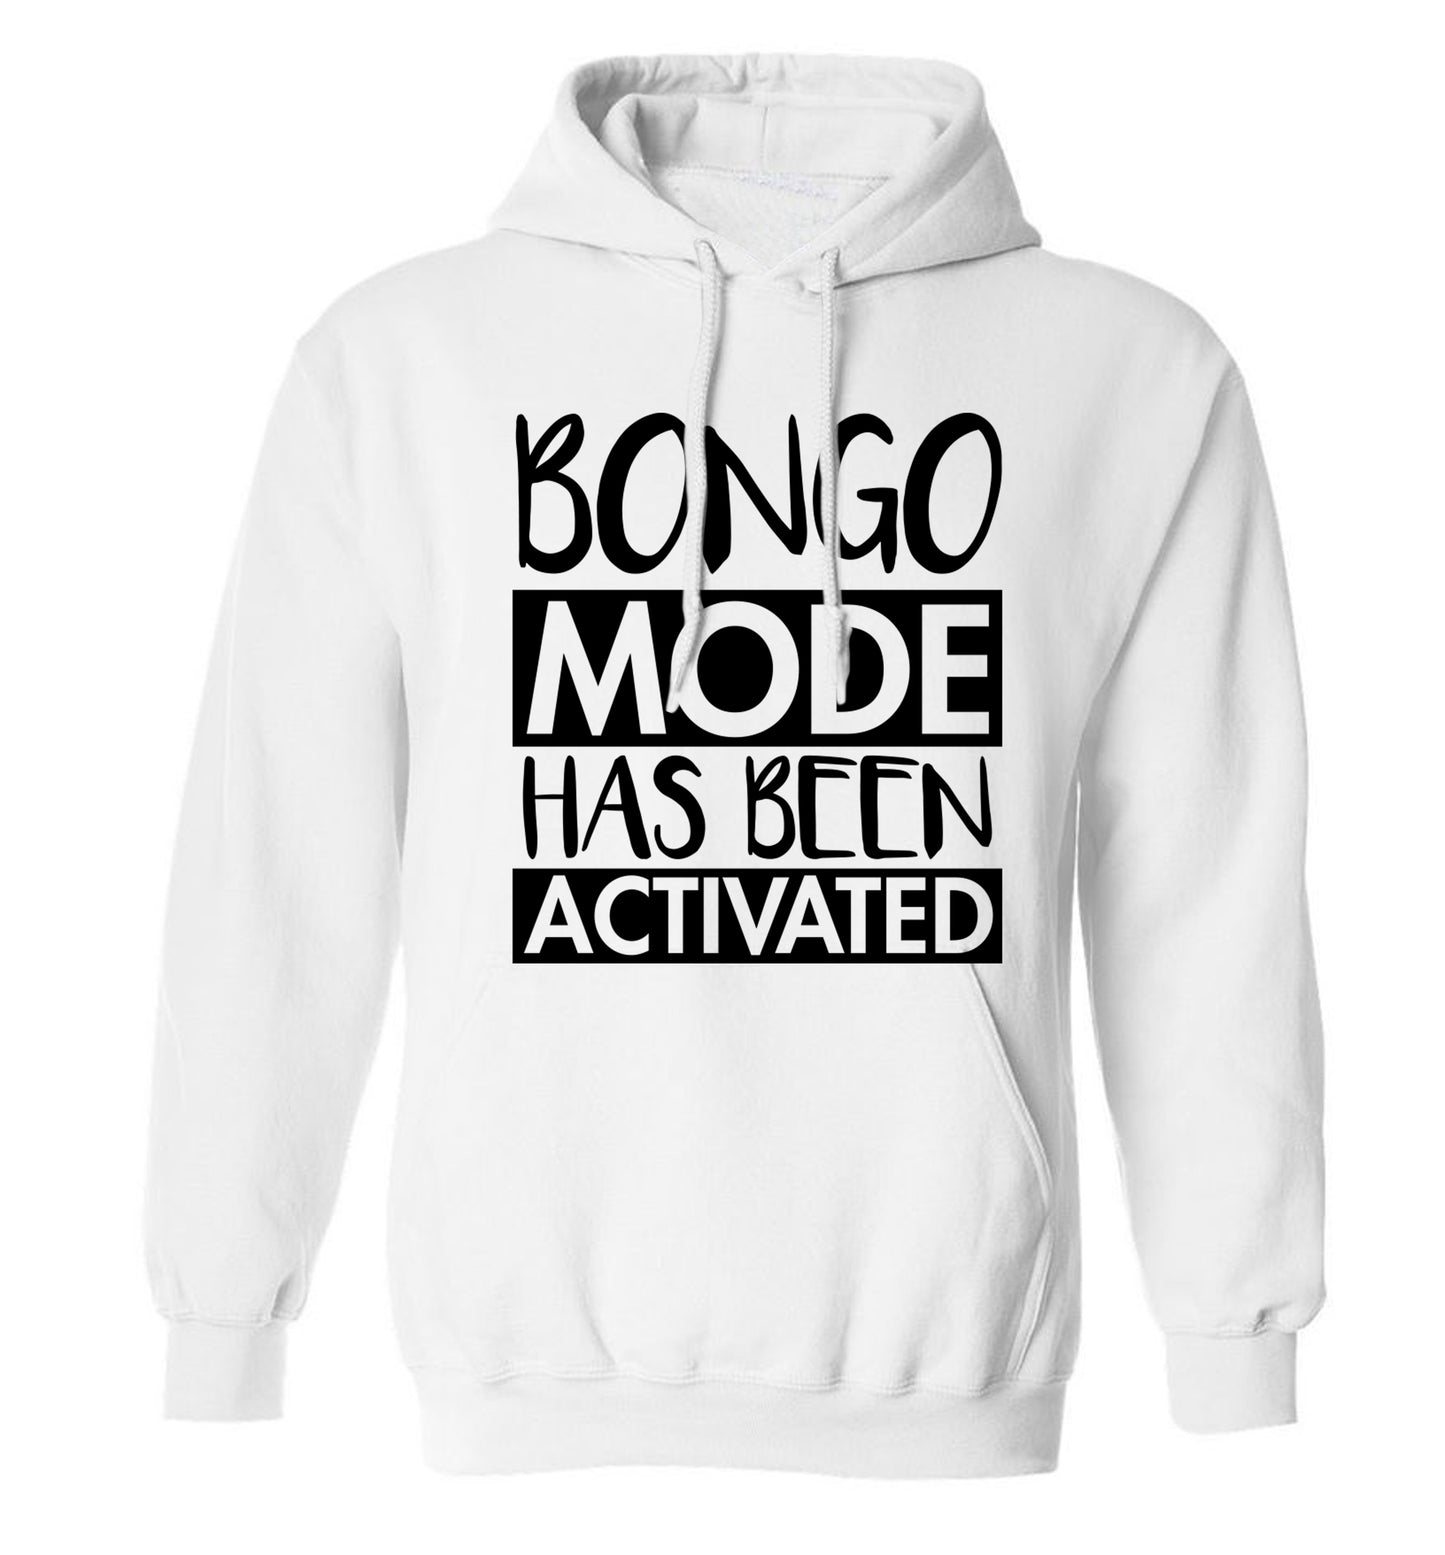 Bongo mode has been activated adults unisexwhite hoodie 2XL